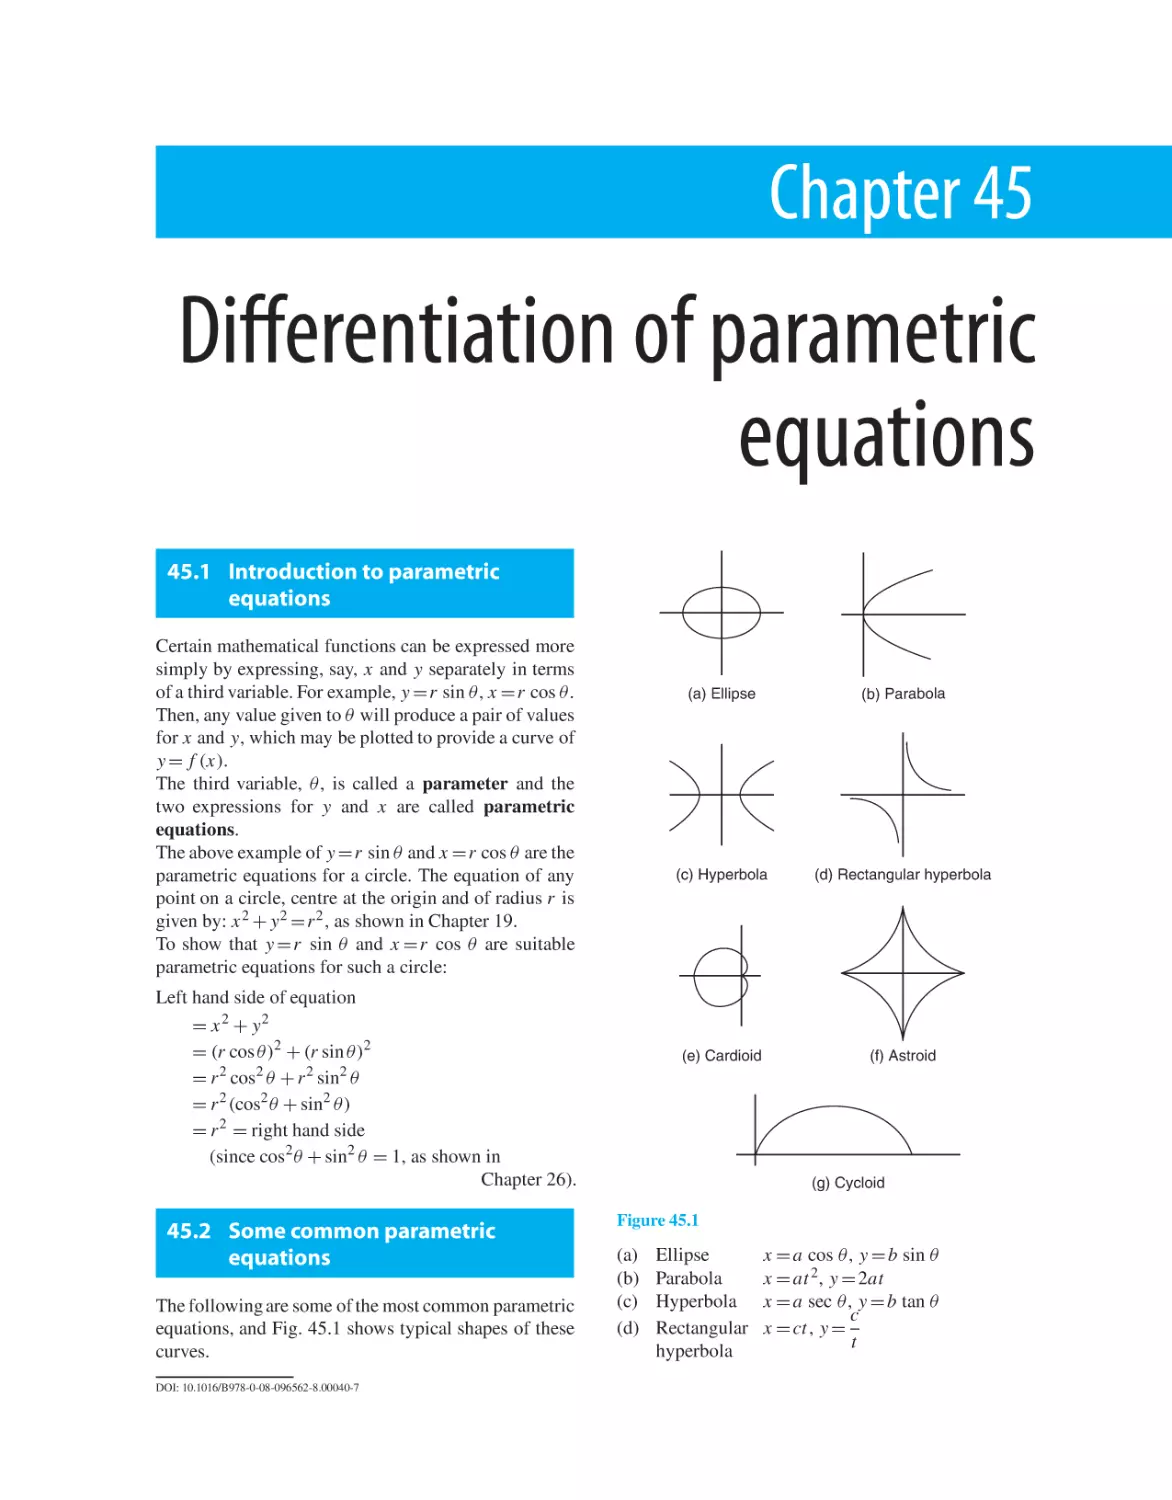 Chapter 45. Differentiation of parametric equations
45.1 Introduction to parametric equations
45.2 Some common parametric equations